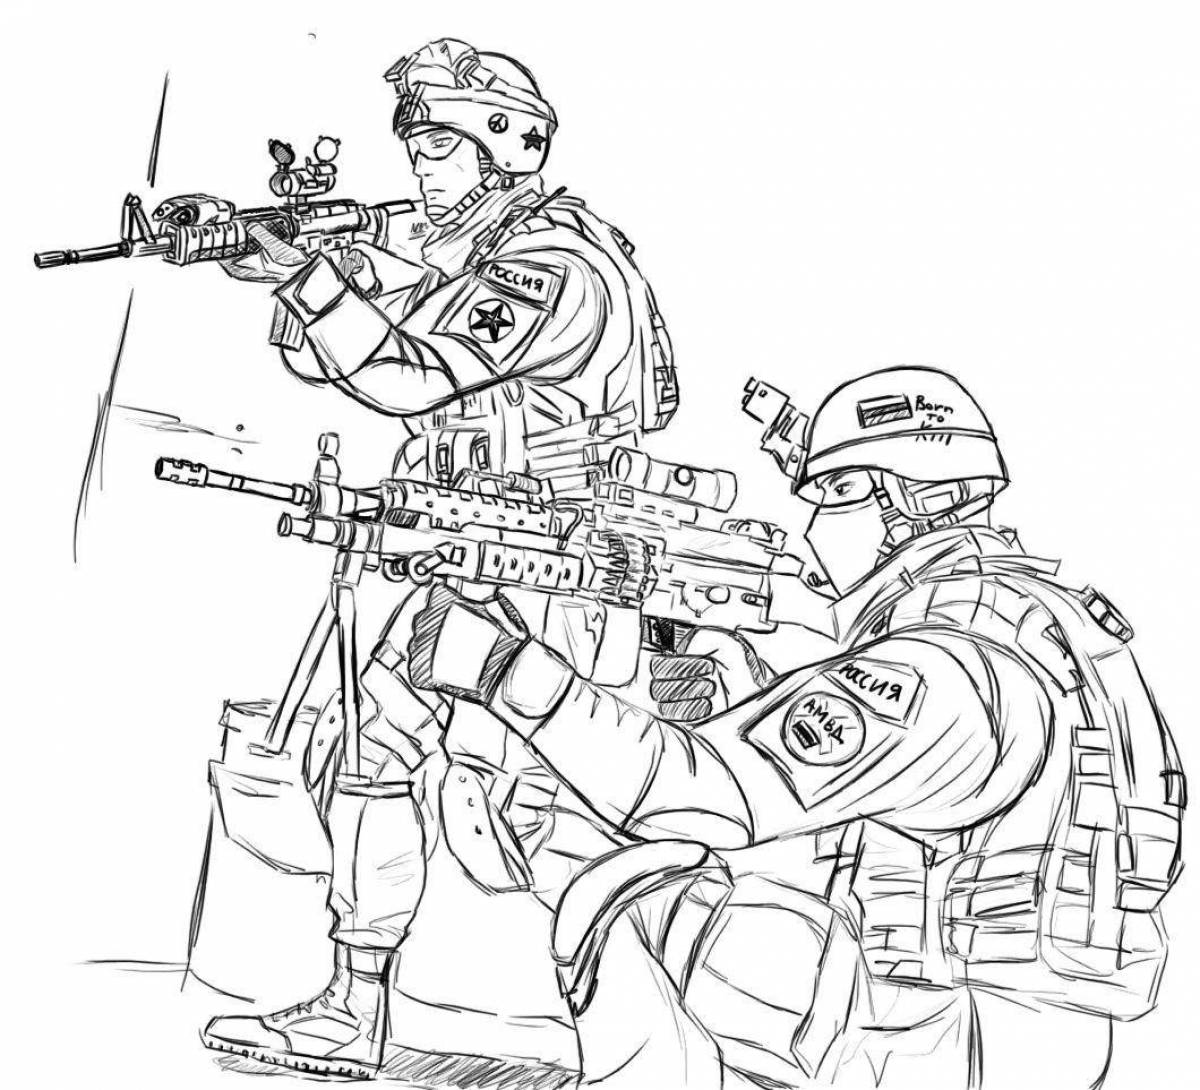 Army special forces #3